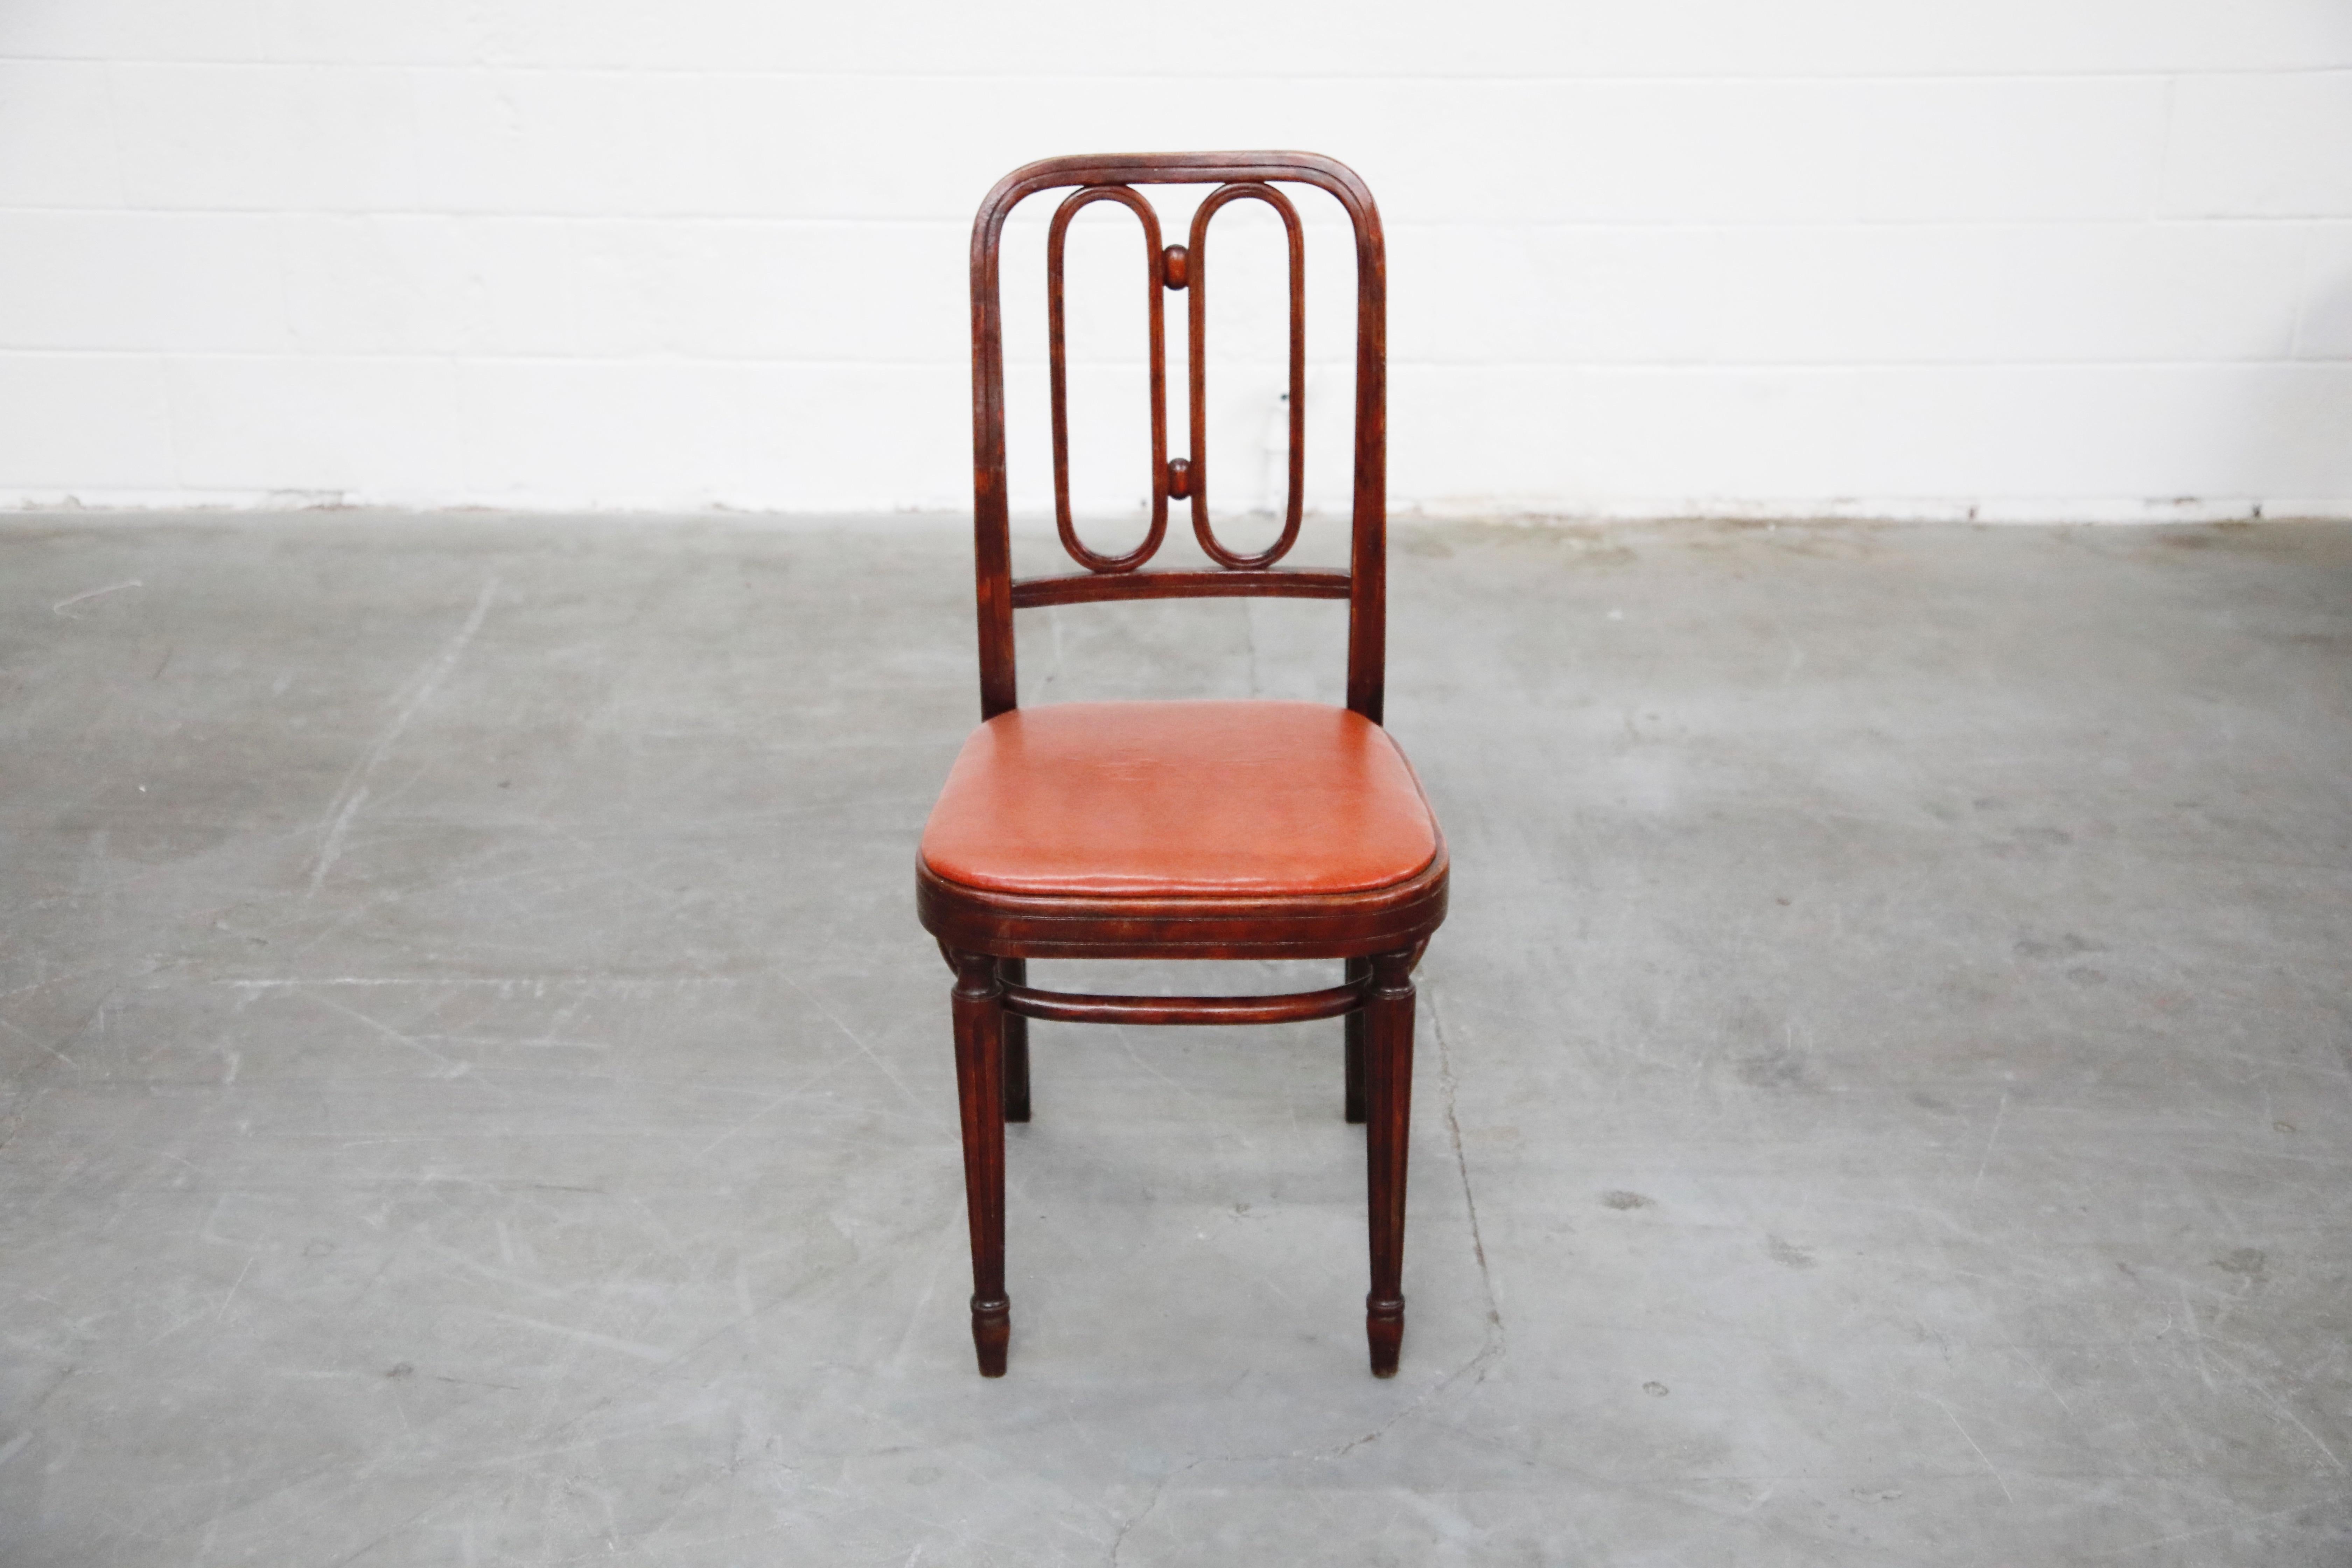 An amazing rare bentwood side chair by Josef Hoffmann for Thonet, circa 1920s, signed with Thonet label. This incredible authentic side chair features dark stained bentwood and burgundy seat by the famous Thonet furniture company first started by